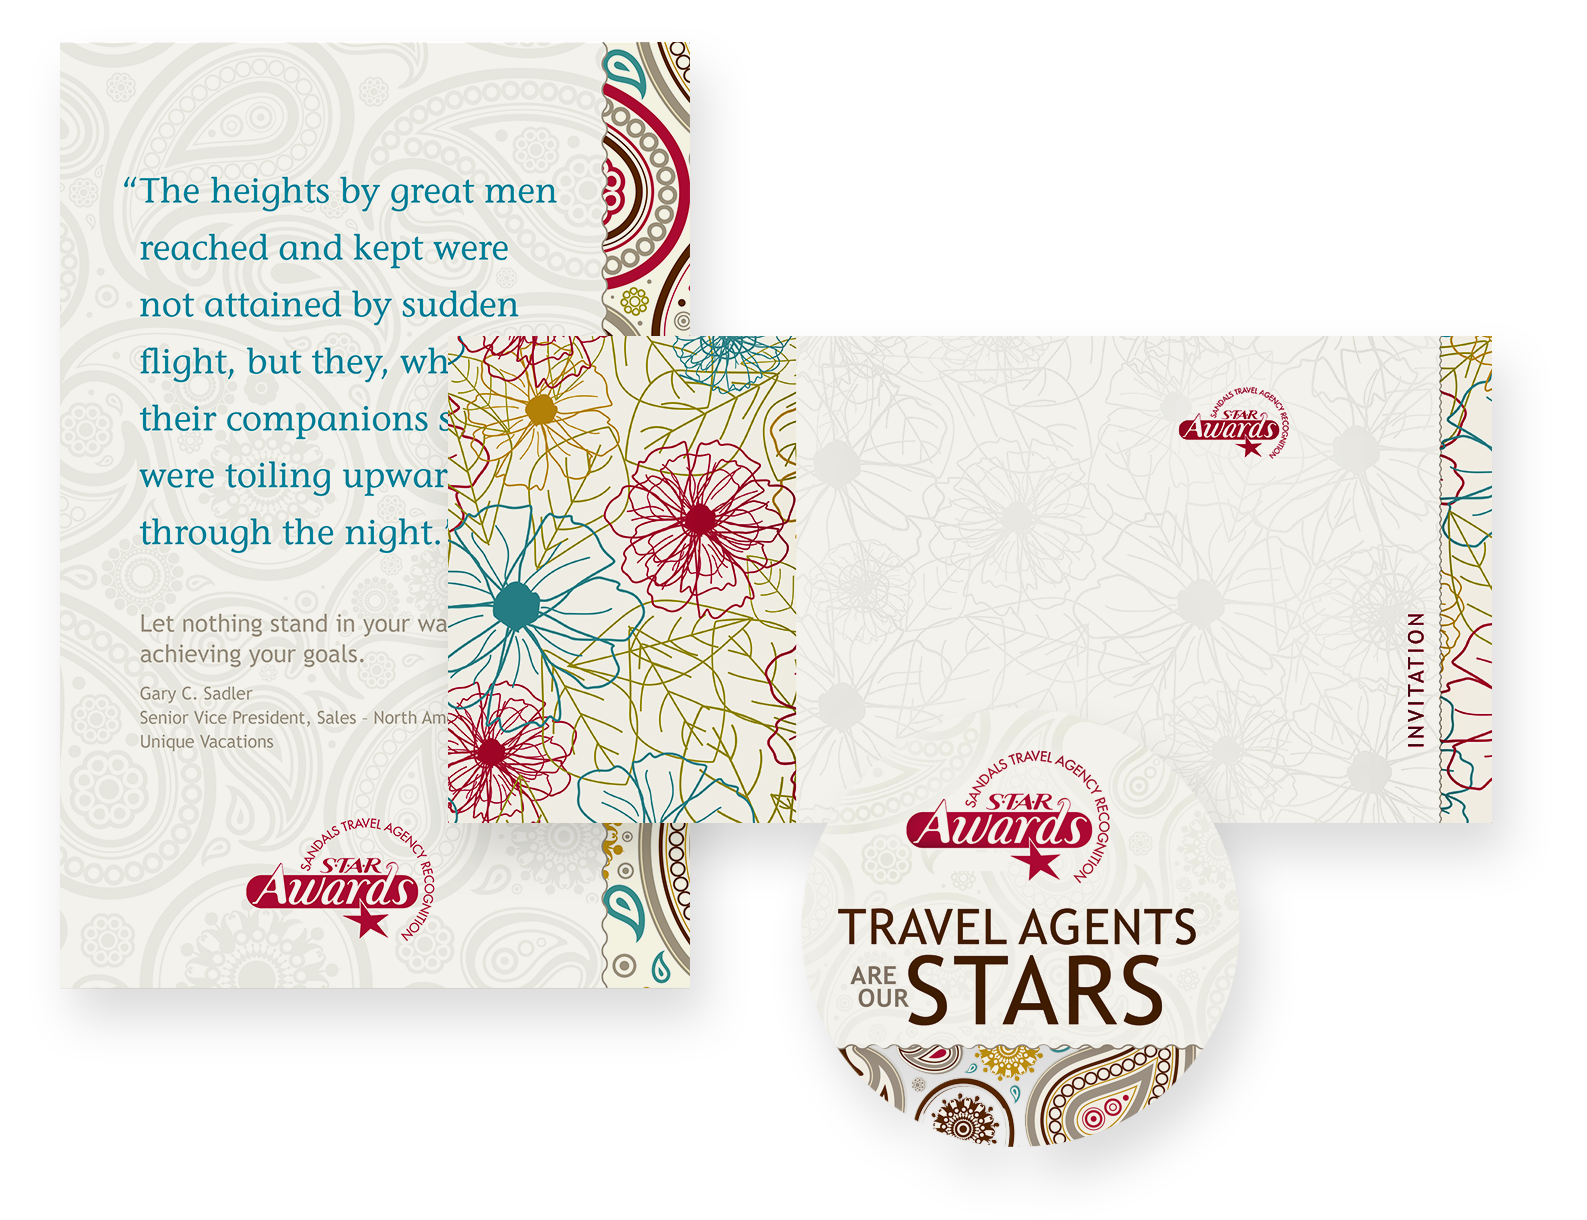 Sandals_Star_Awards_Collateral